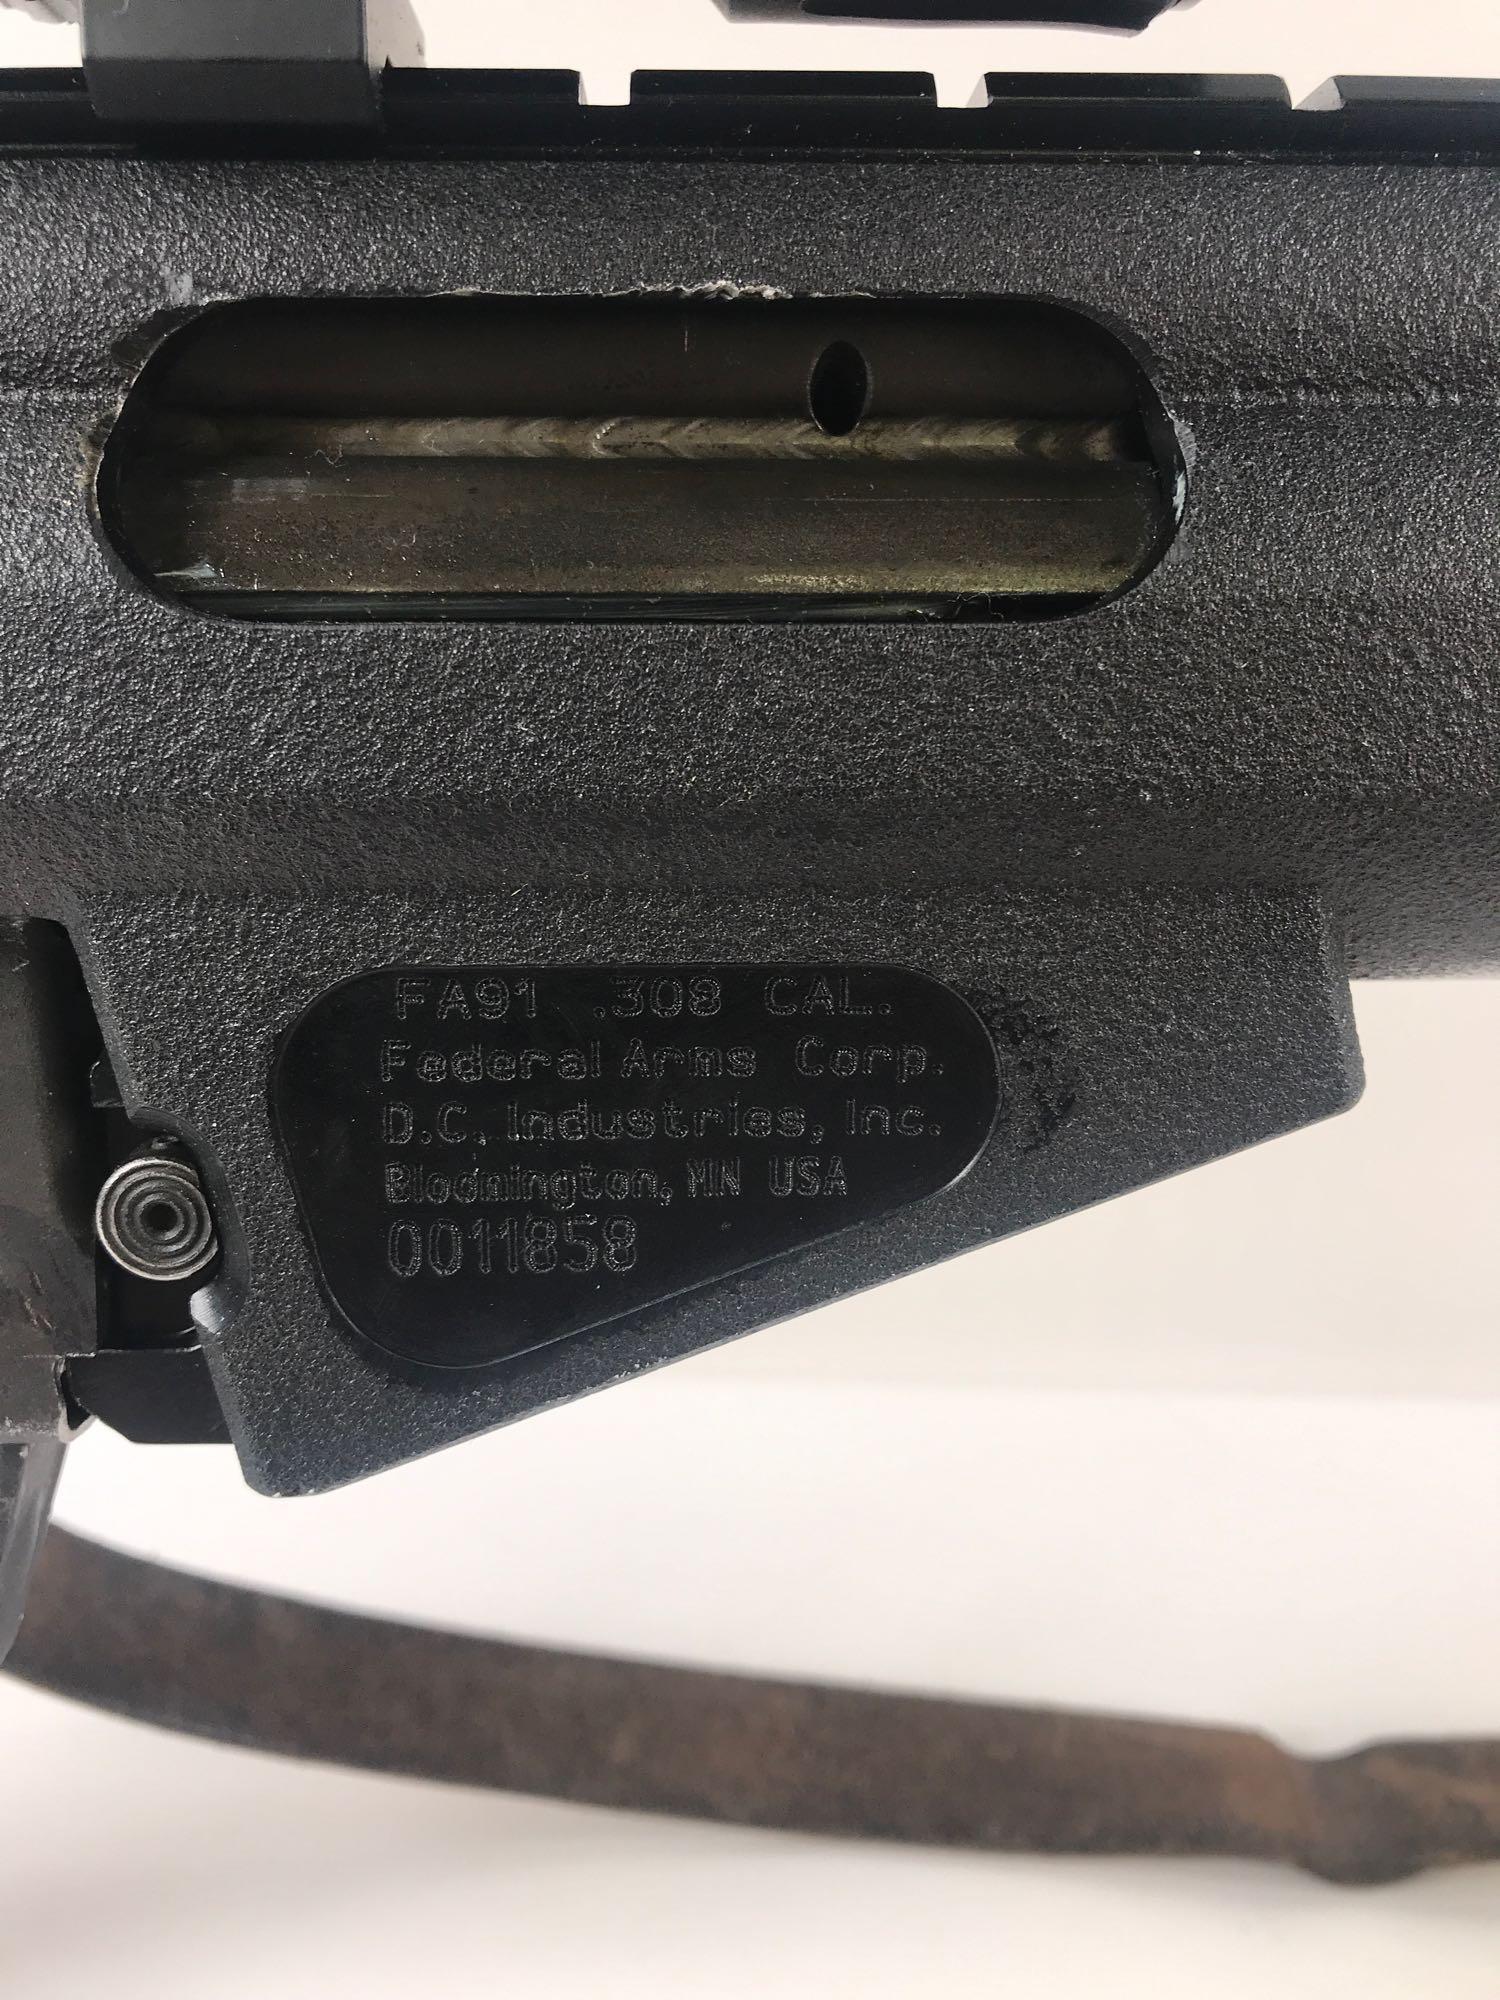 Federal Arms Corp Model FA91 Rifle with Scope